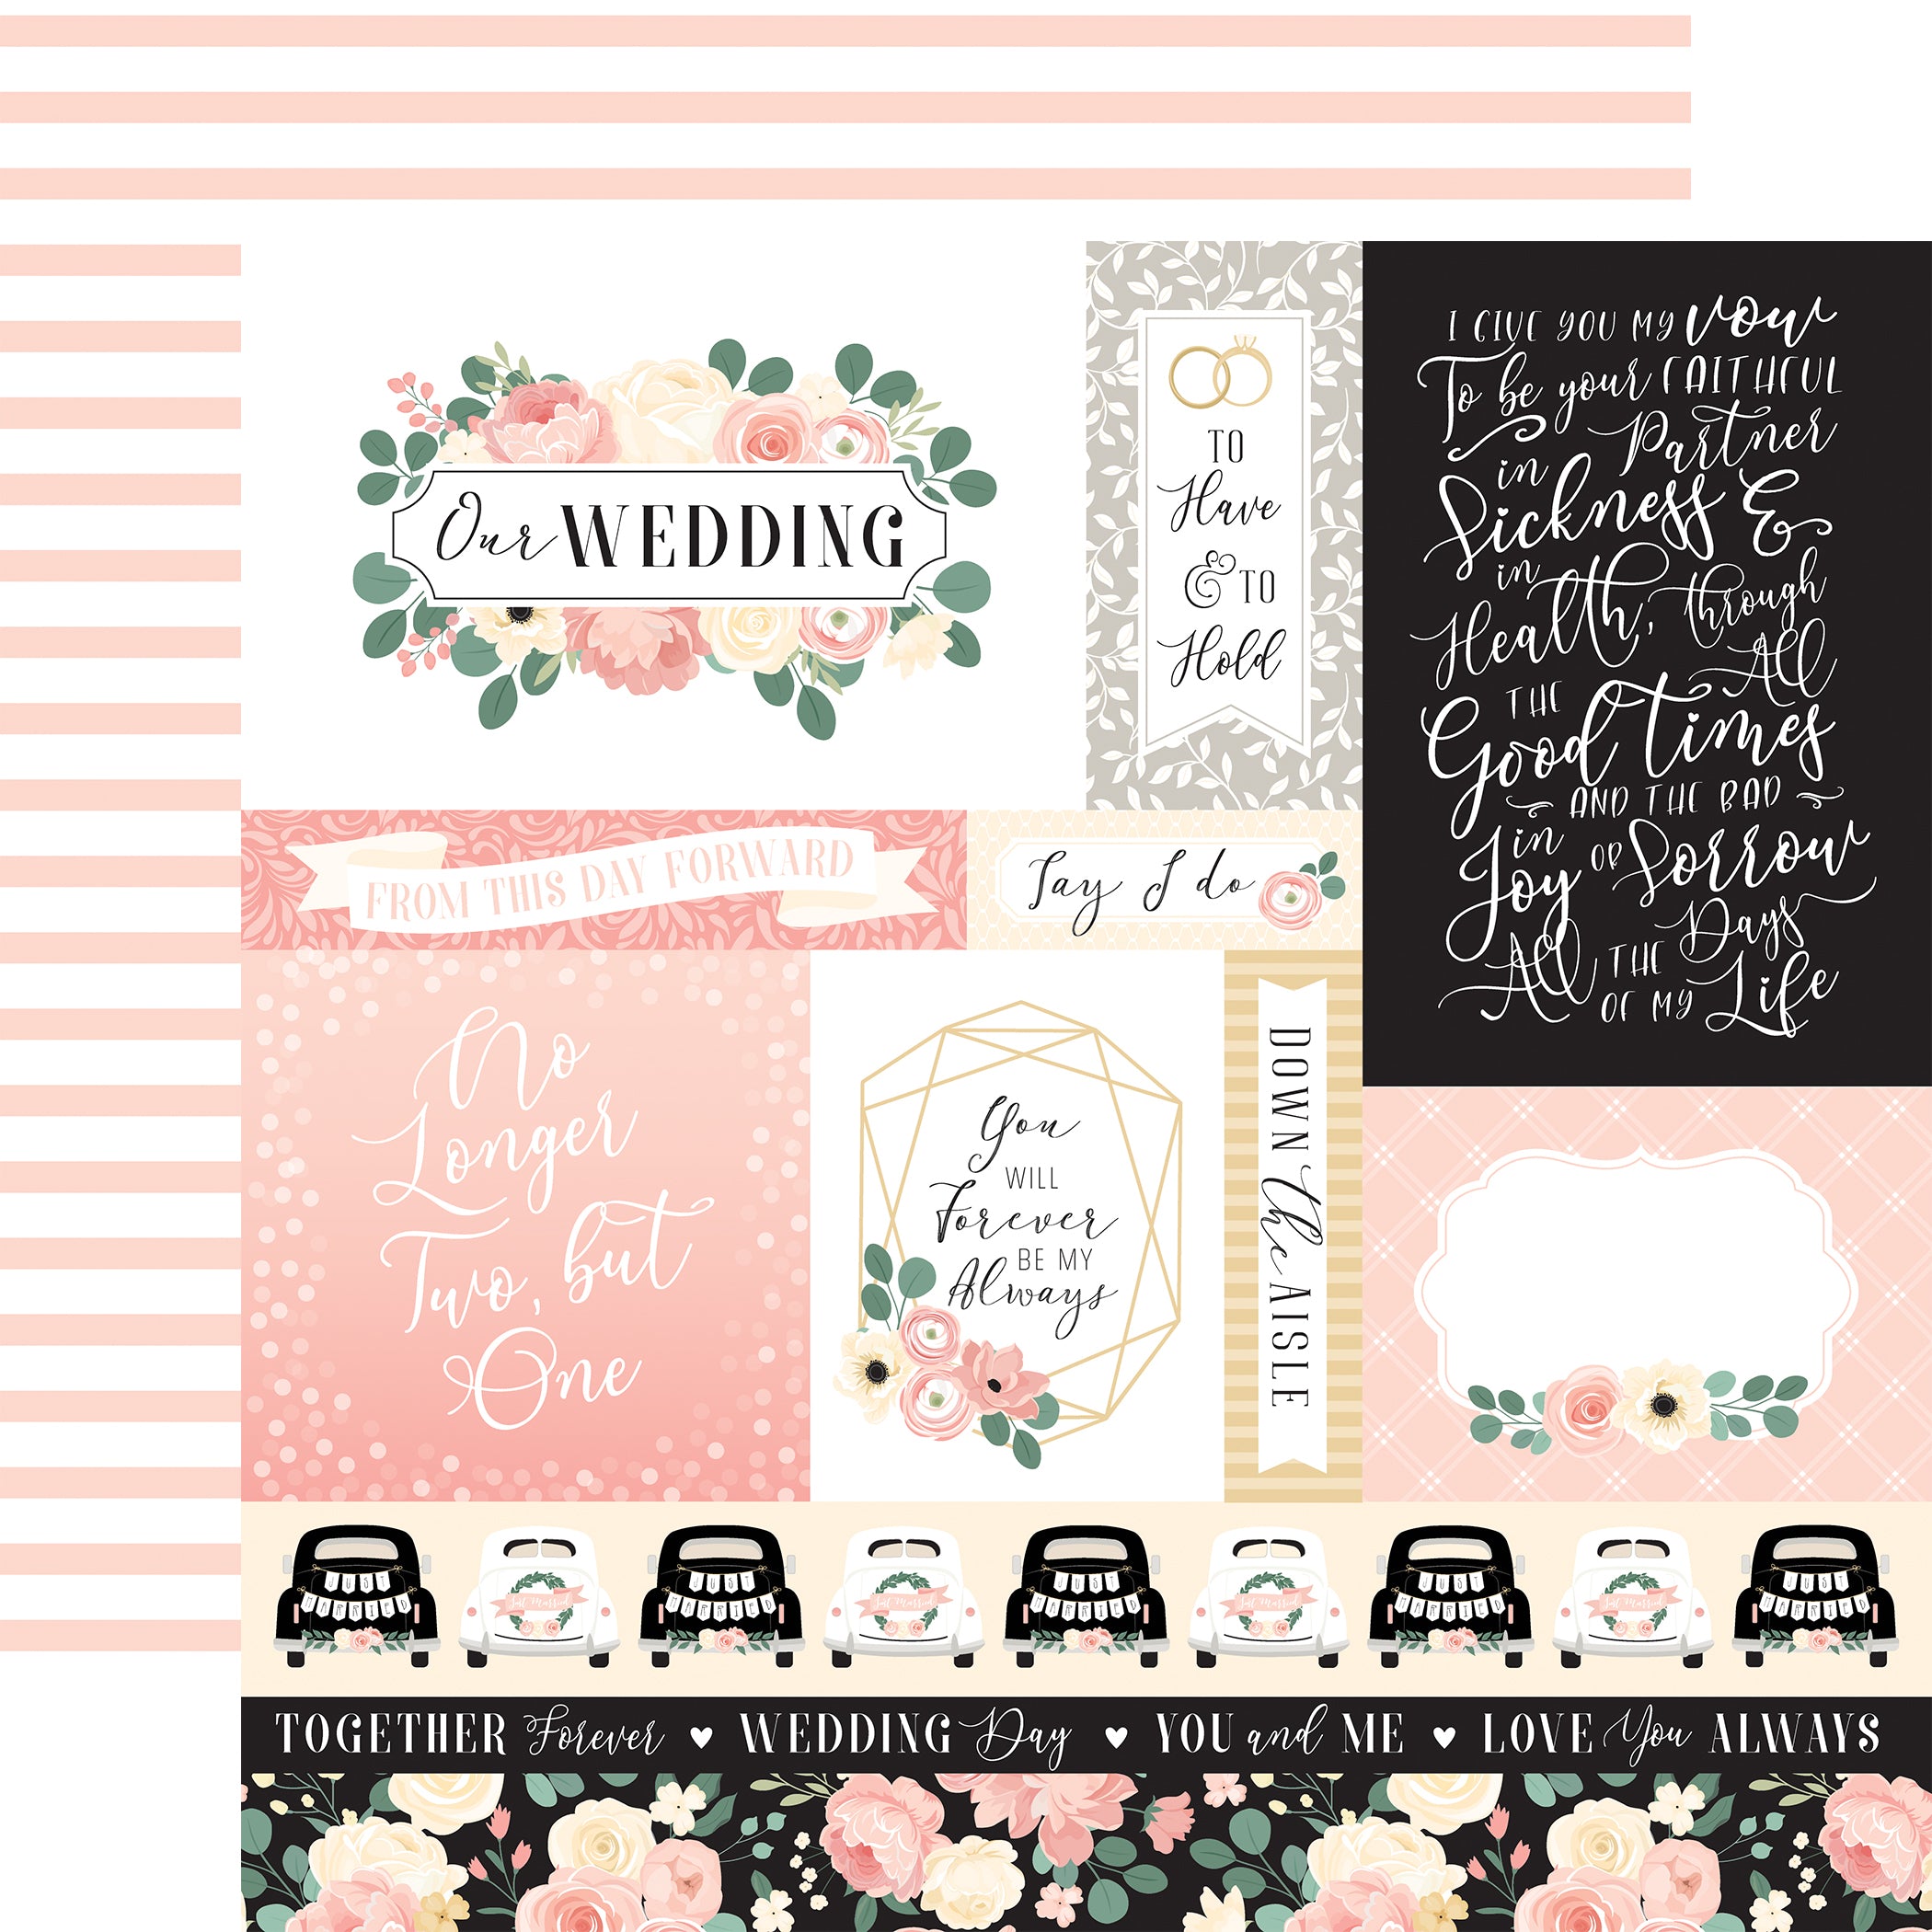 Our Wedding Collection Kit - Echo Park Paper Co.